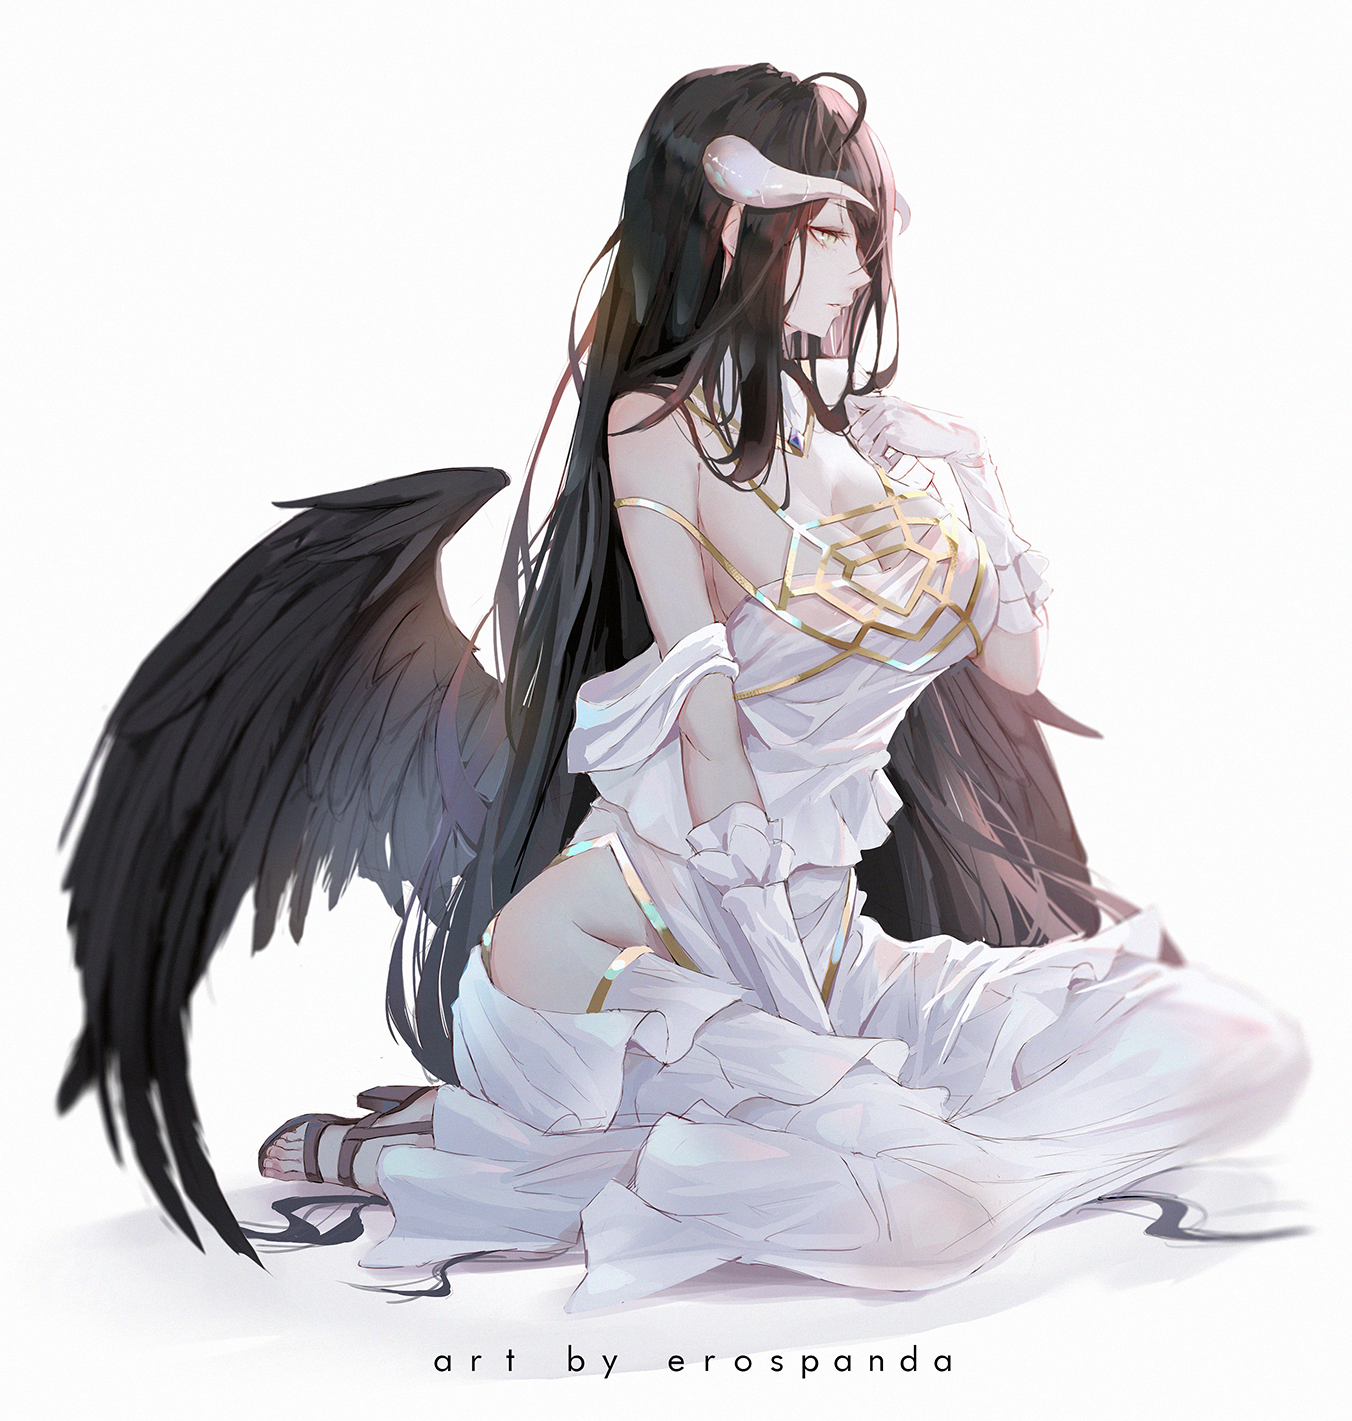 Anime 1352x1421 anime girls simple background Overlord (anime) Albedo (OverLord) fan art succubus black hair demon horns long hair white dress 2D big boobs monster girl cleavage ecchi thighs the gap curvy black wings long sleeves yellow eyes heels